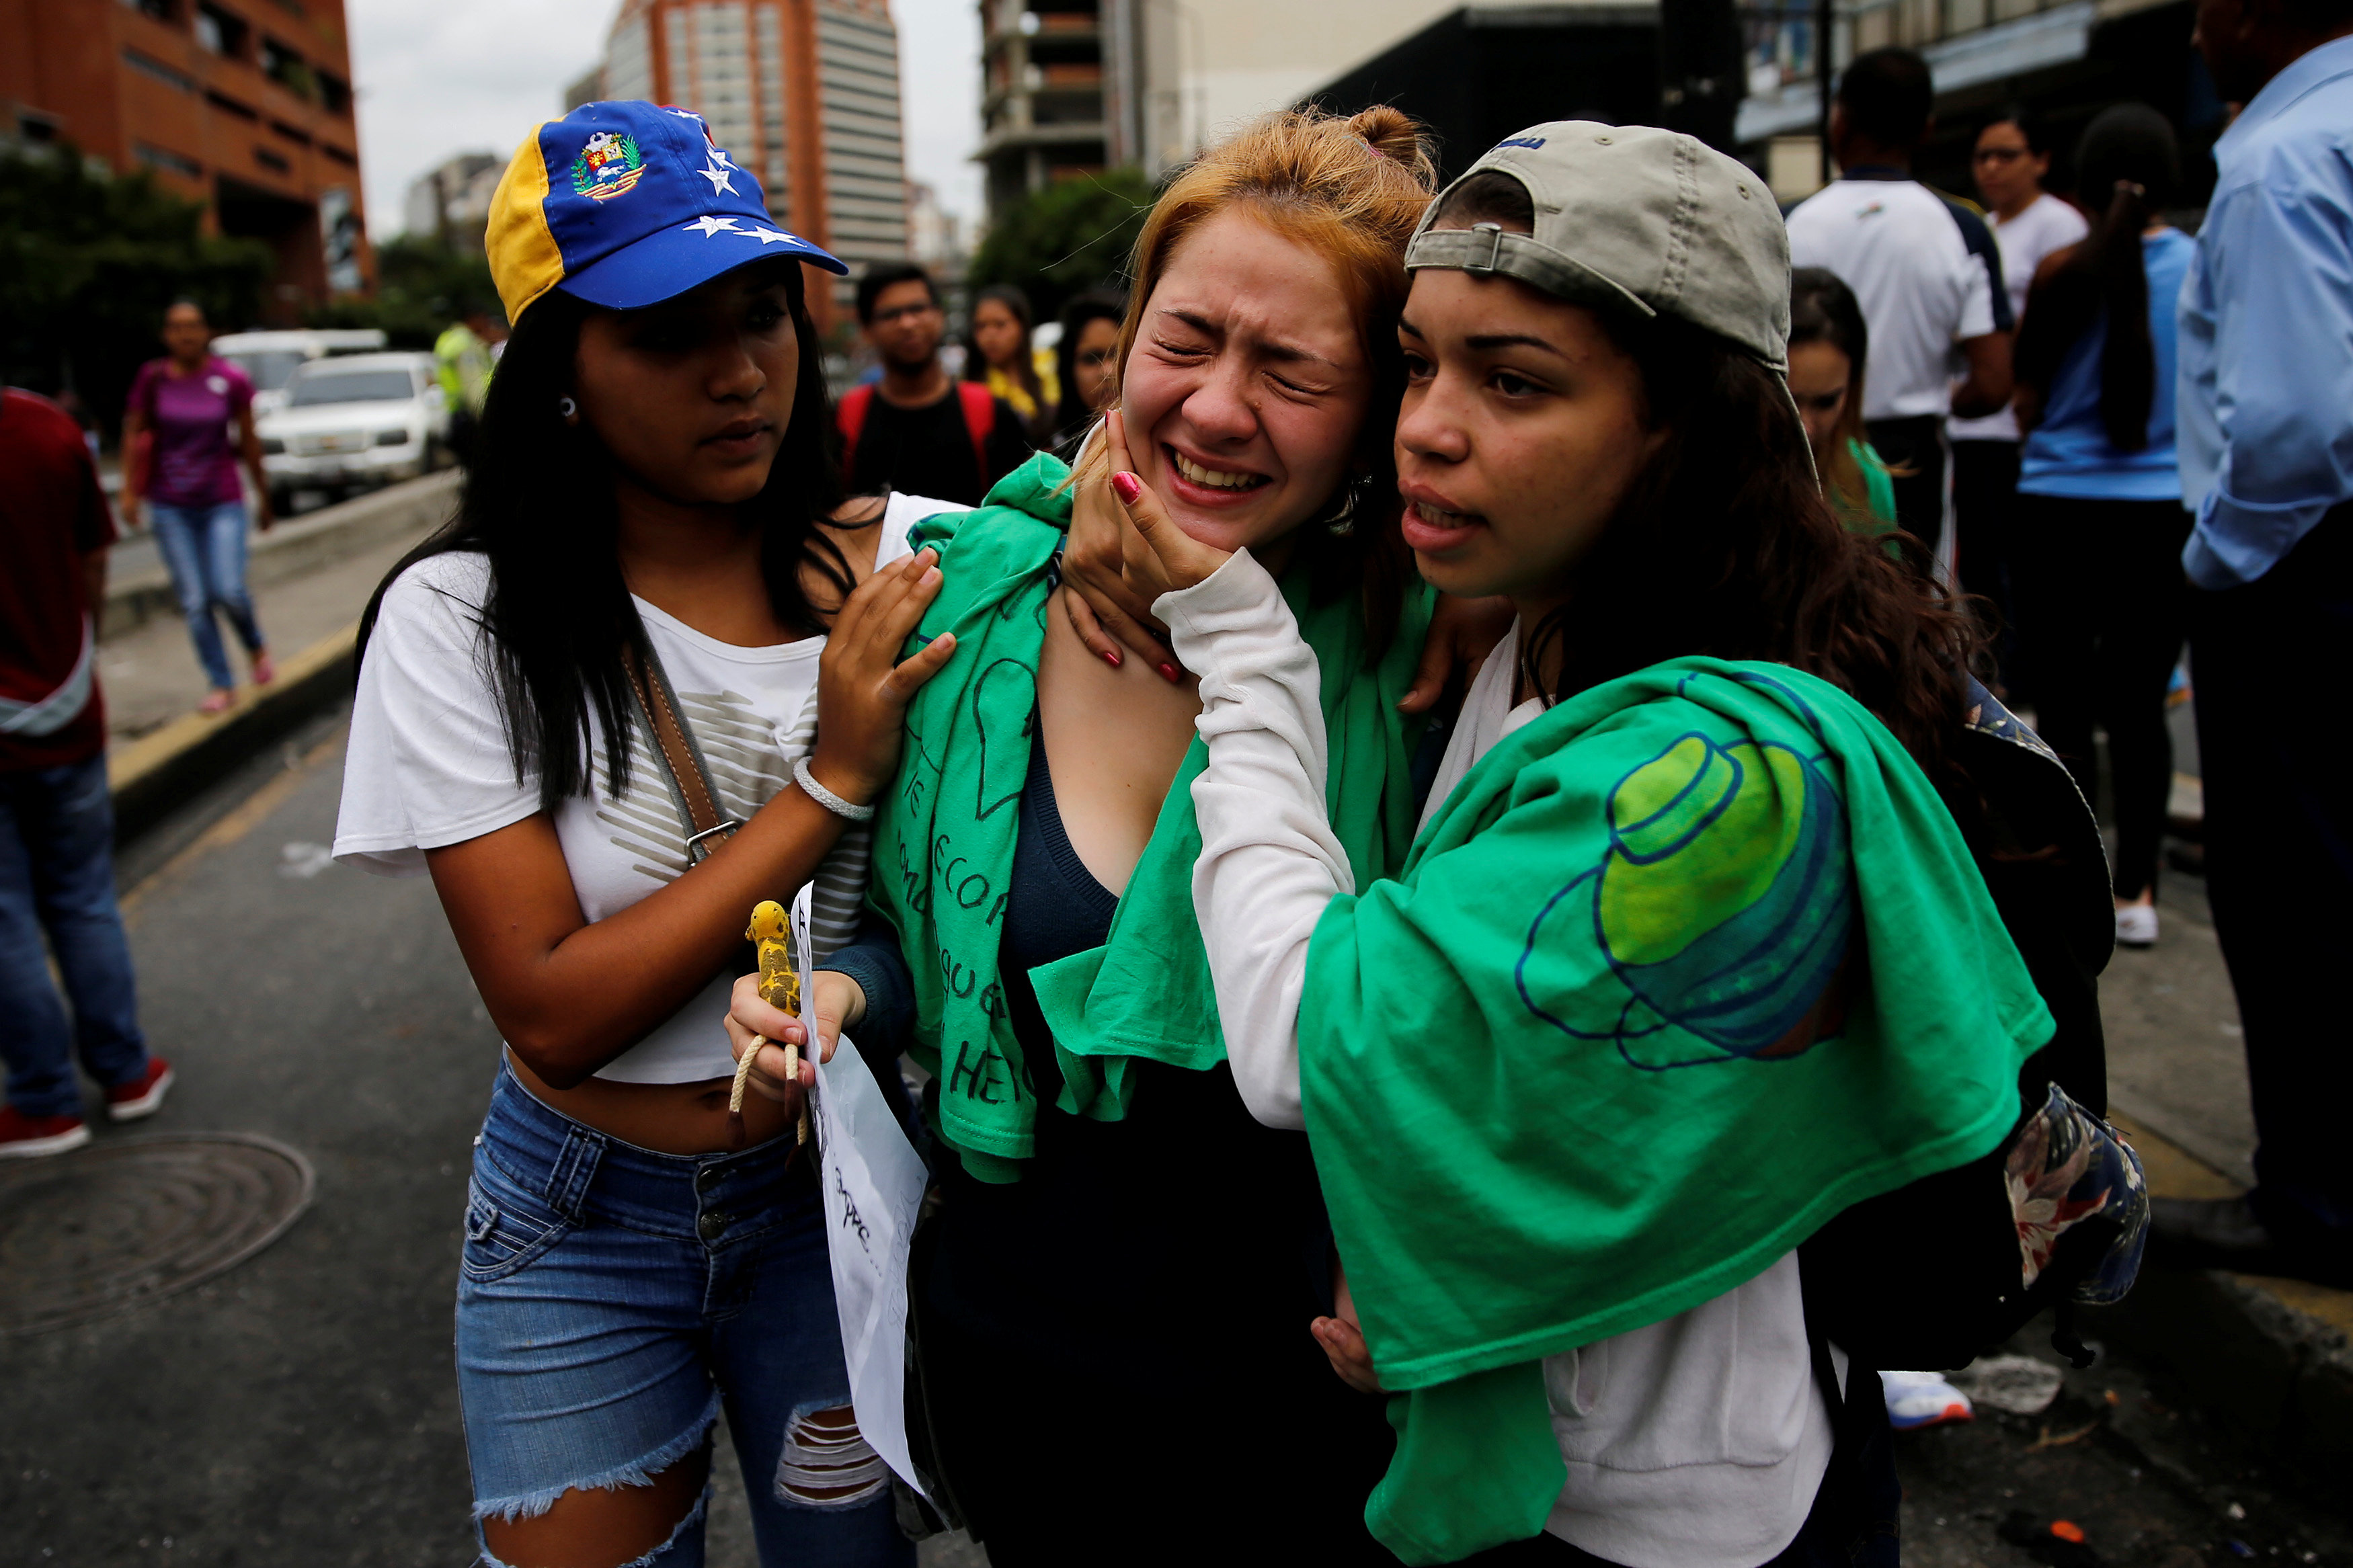 A woman reacts at the place where 17-year-old demonstrator Neomar Lander died during riots at a rally against Venezuelan President Nicolas Maduro's government in Caracas, Venezuela, June 8, 2017. REUTERS/Ivan Alvarado